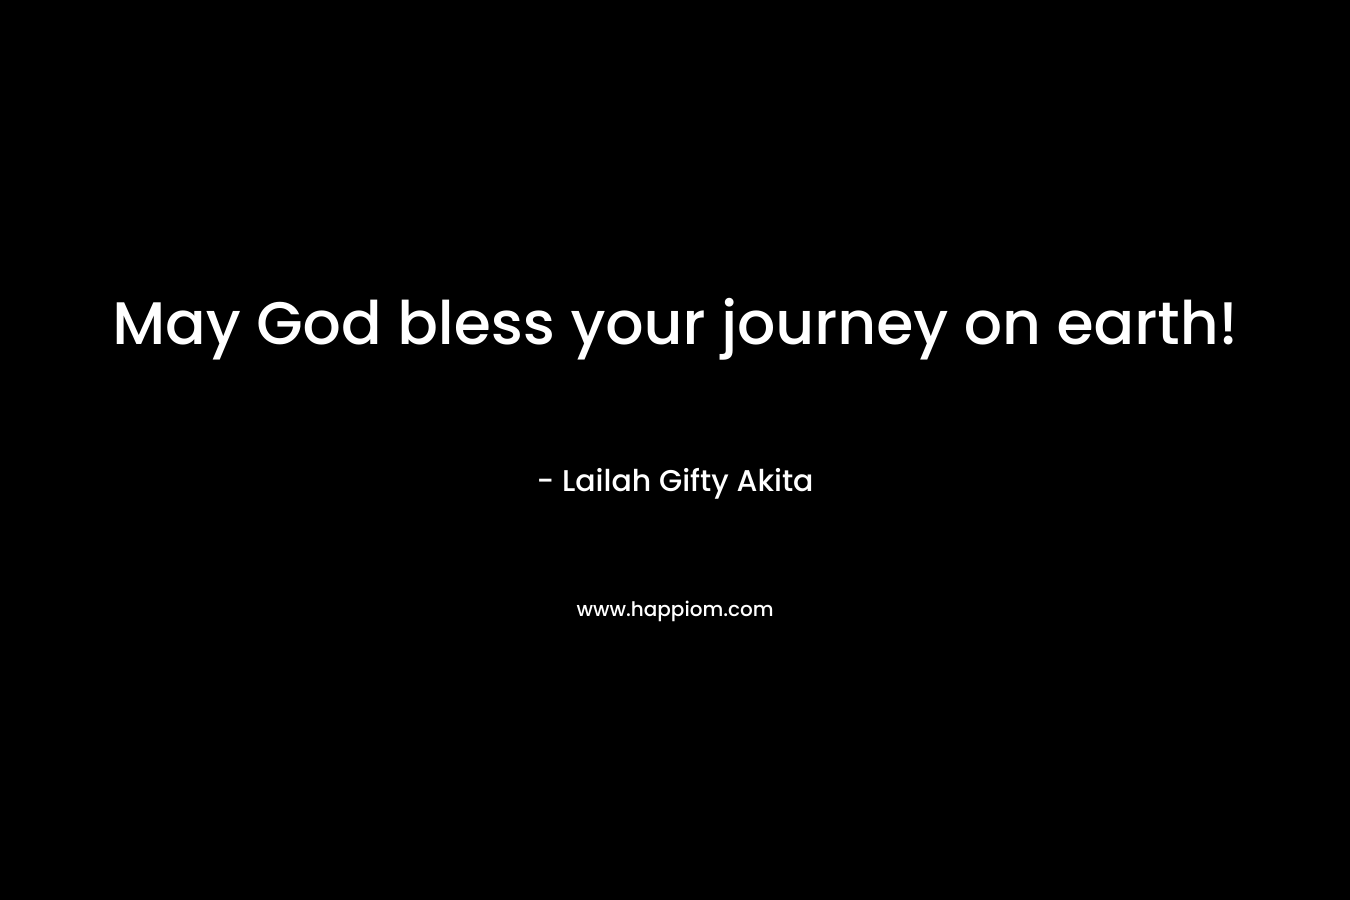 May God bless your journey on earth!